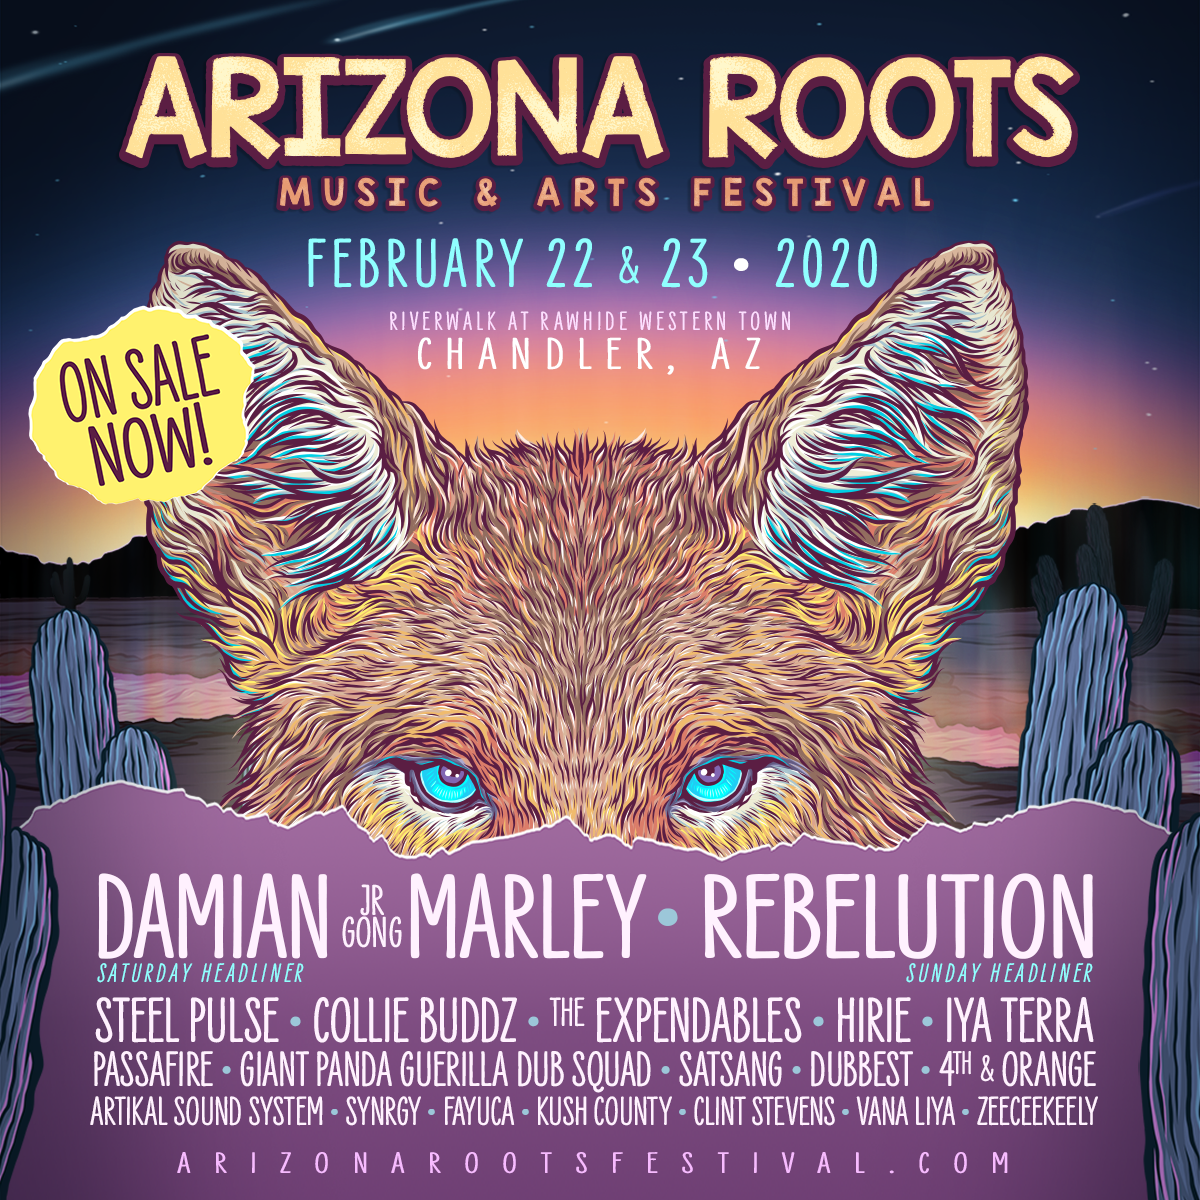 Arizona Roots Music and Arts Festival 2020 lineup. Photo provided.